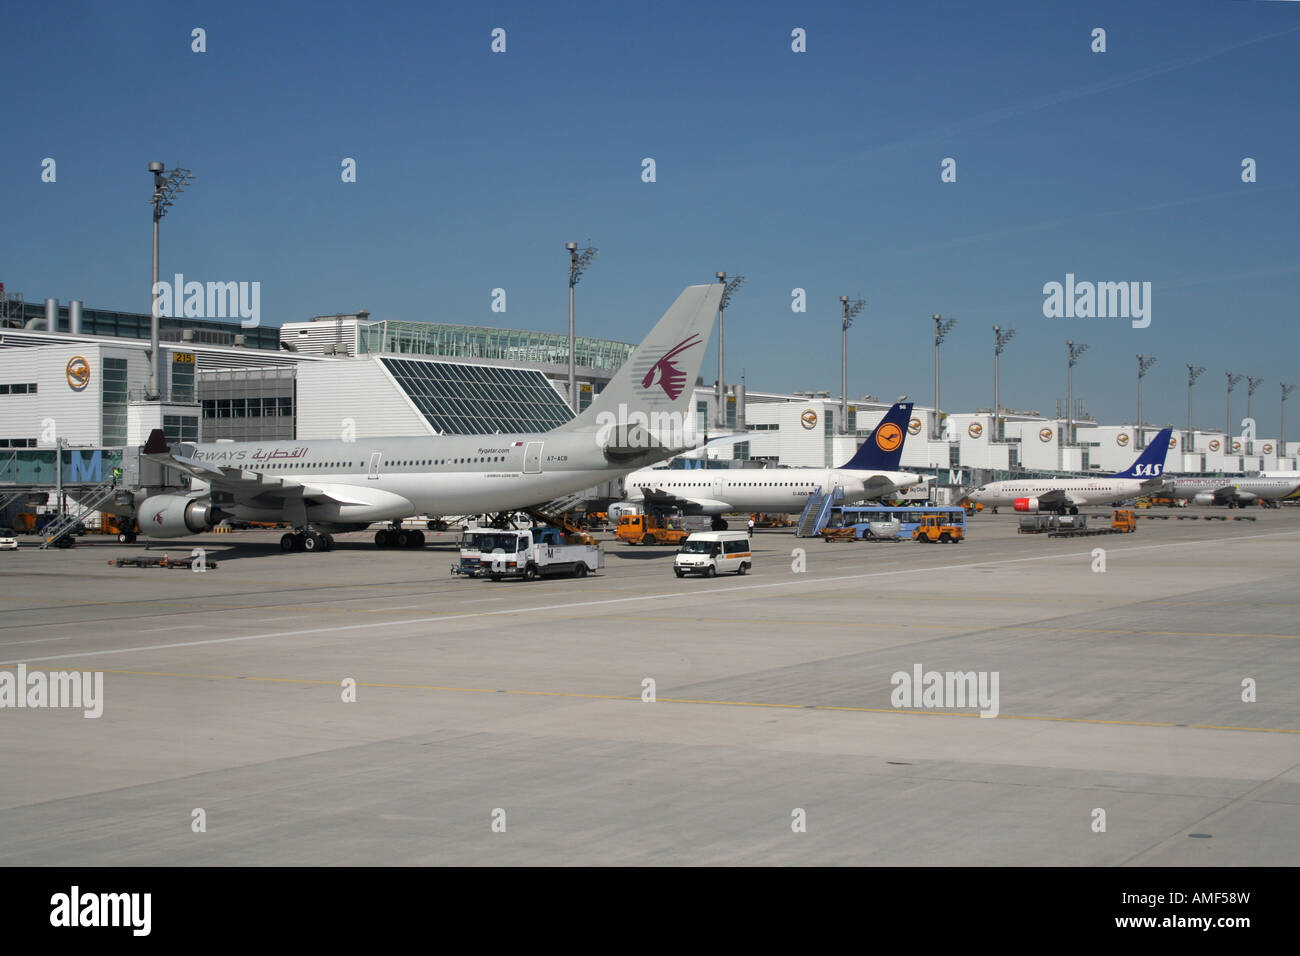 Airport and planes. Aircraft at their gates at Munich Airport, Germany. A Qatar Airways Airbus A330 is in the foreground. Air travel. Stock Photo